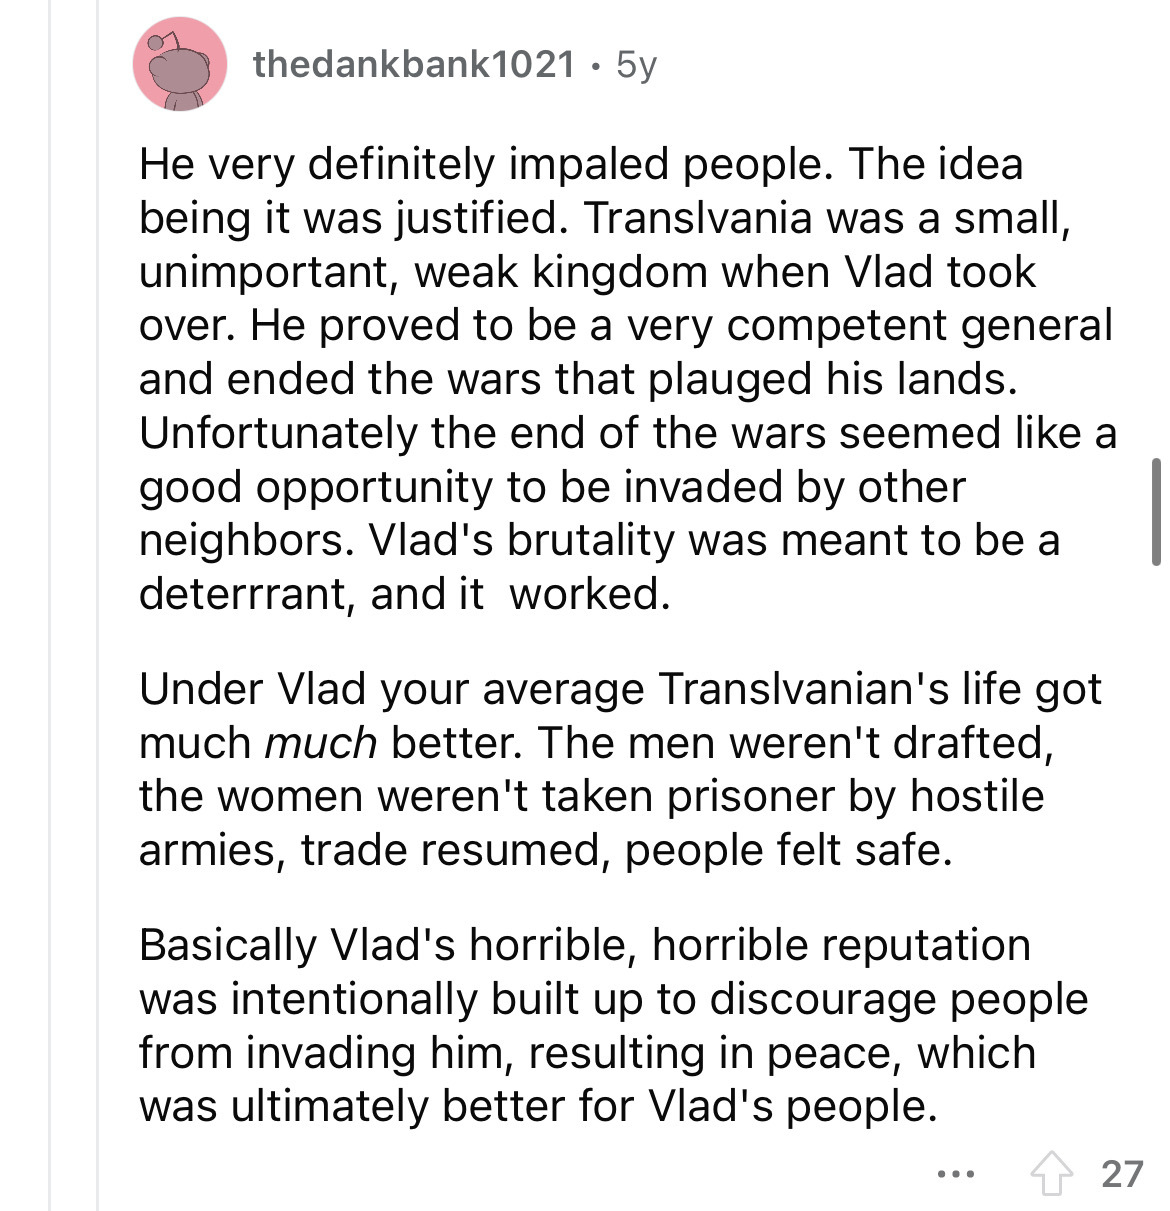 angle - thedankbank1021 5y He very definitely impaled people. The idea being it was justified. Translvania was a small, unimportant, weak kingdom when Vlad took over. He proved to be a very competent general and ended the wars that plauged his lands. Unfo